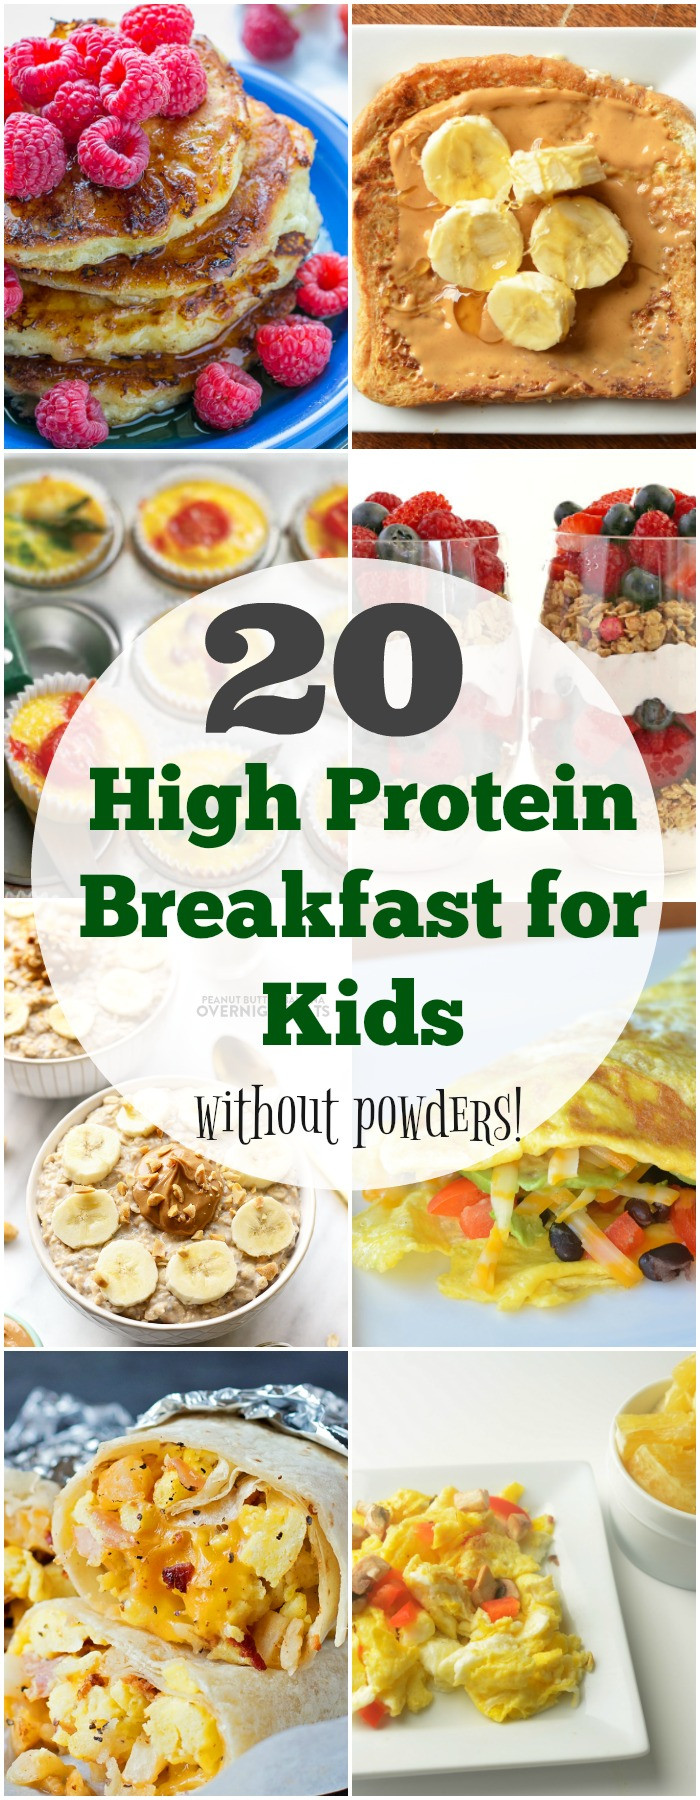 Breakfast Foods For Kids
 20 High Protein Breakfast Ideas for Kids The Organized Mom